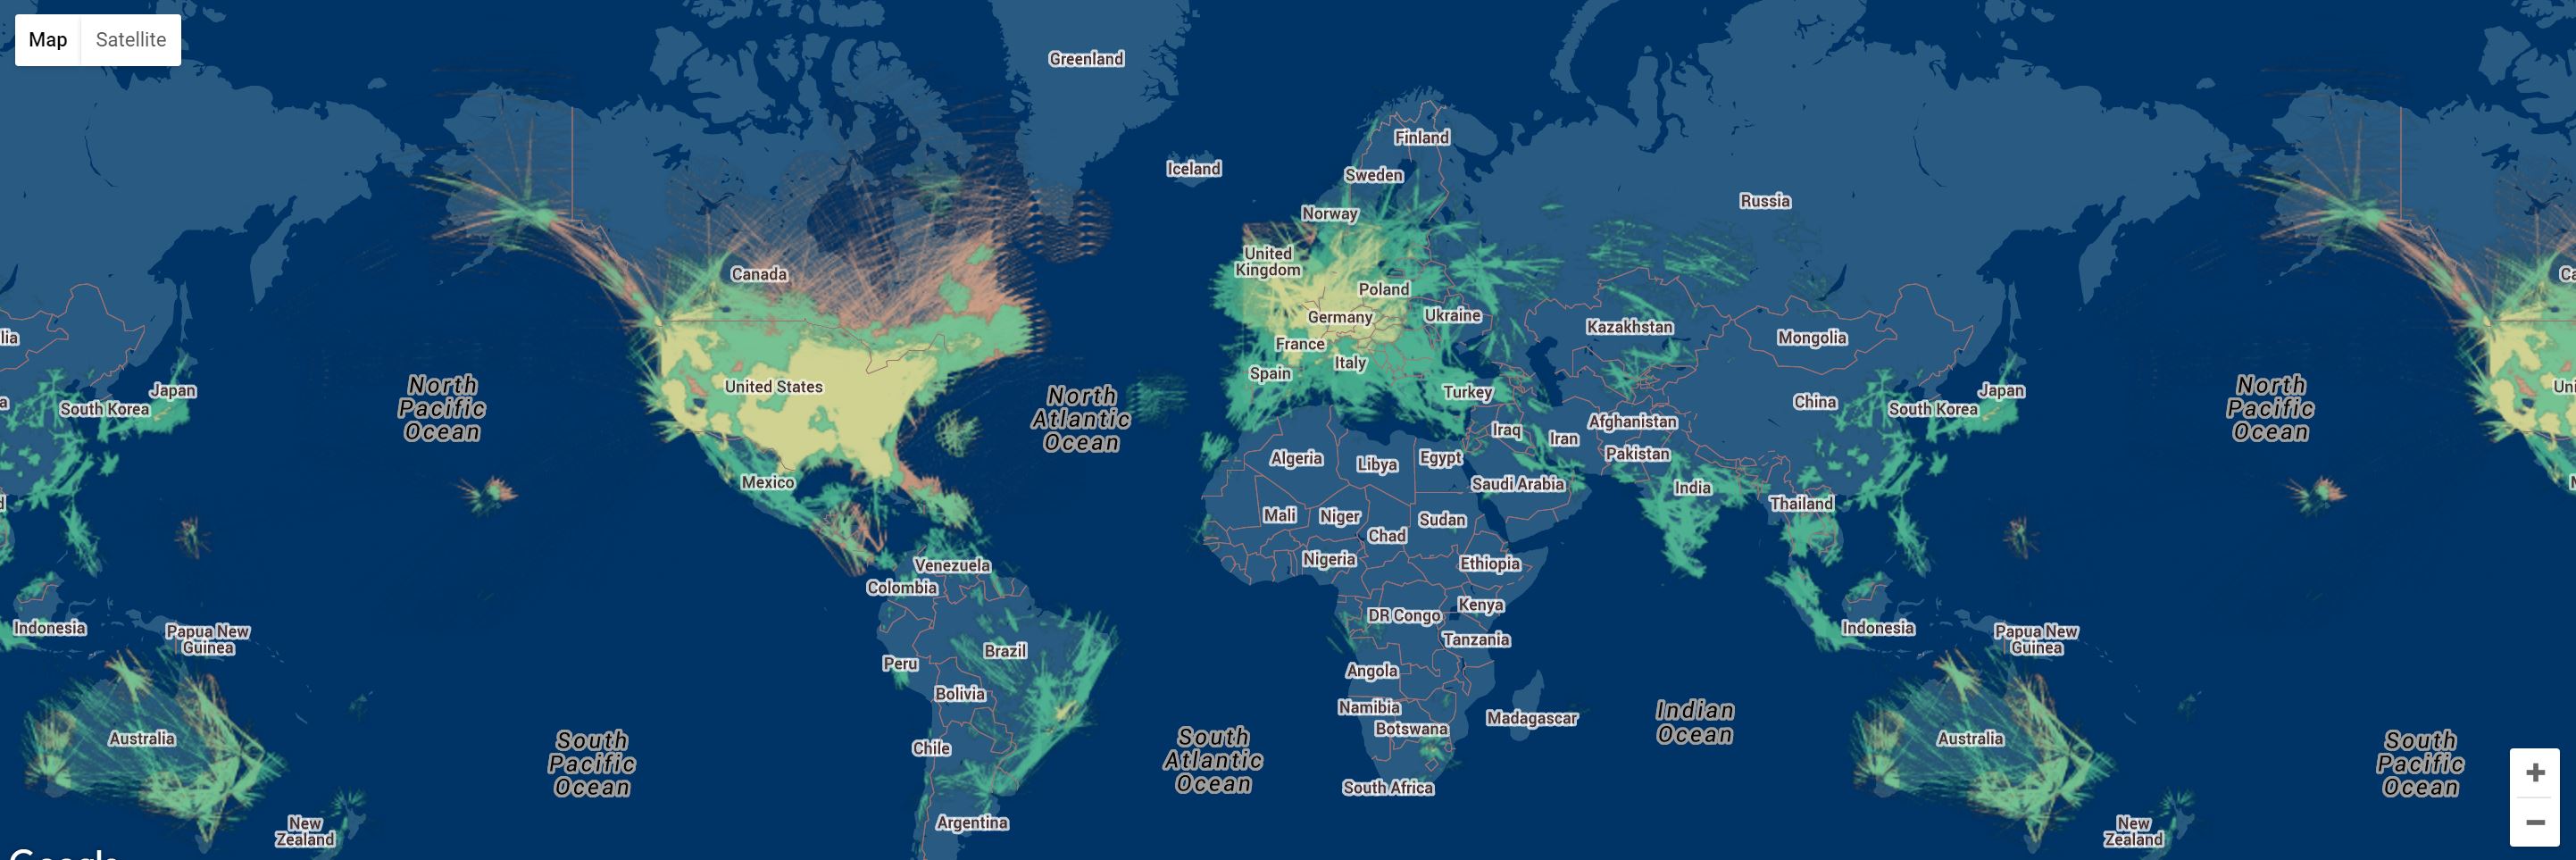 High-altitude (20,000ft - 30,000ft) coverage, as at April 2016